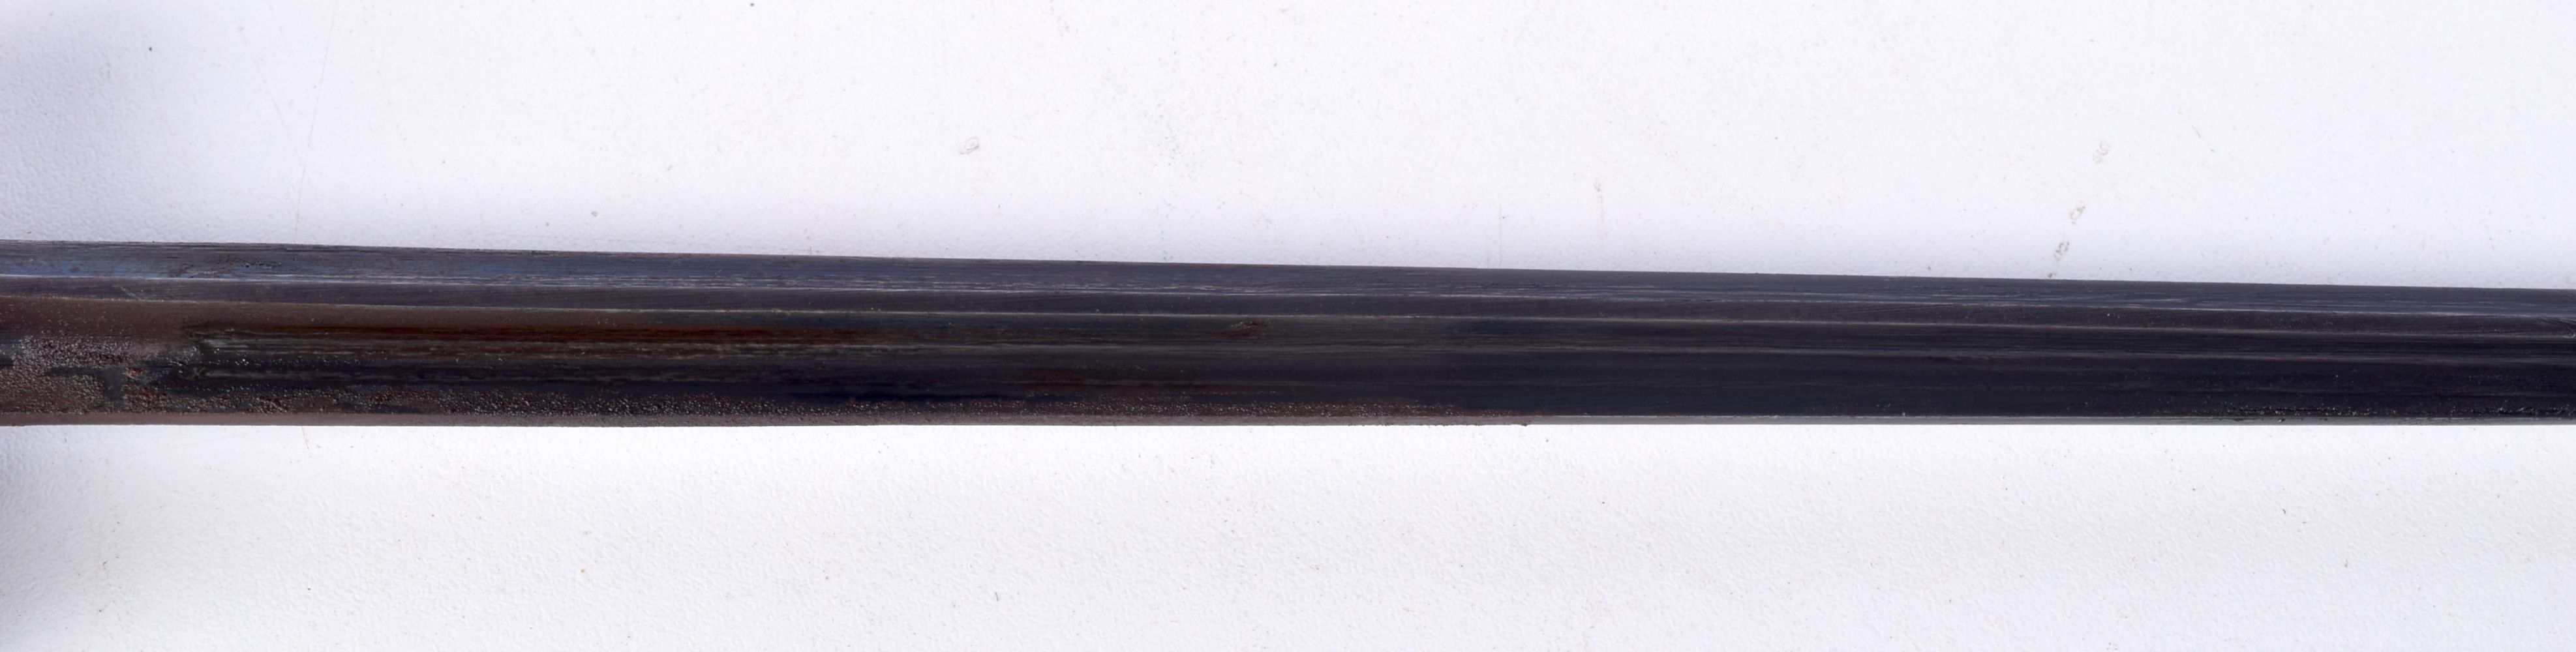 A pair of 19th century 4 sided bayonets 65 cm (2) - Image 4 of 7